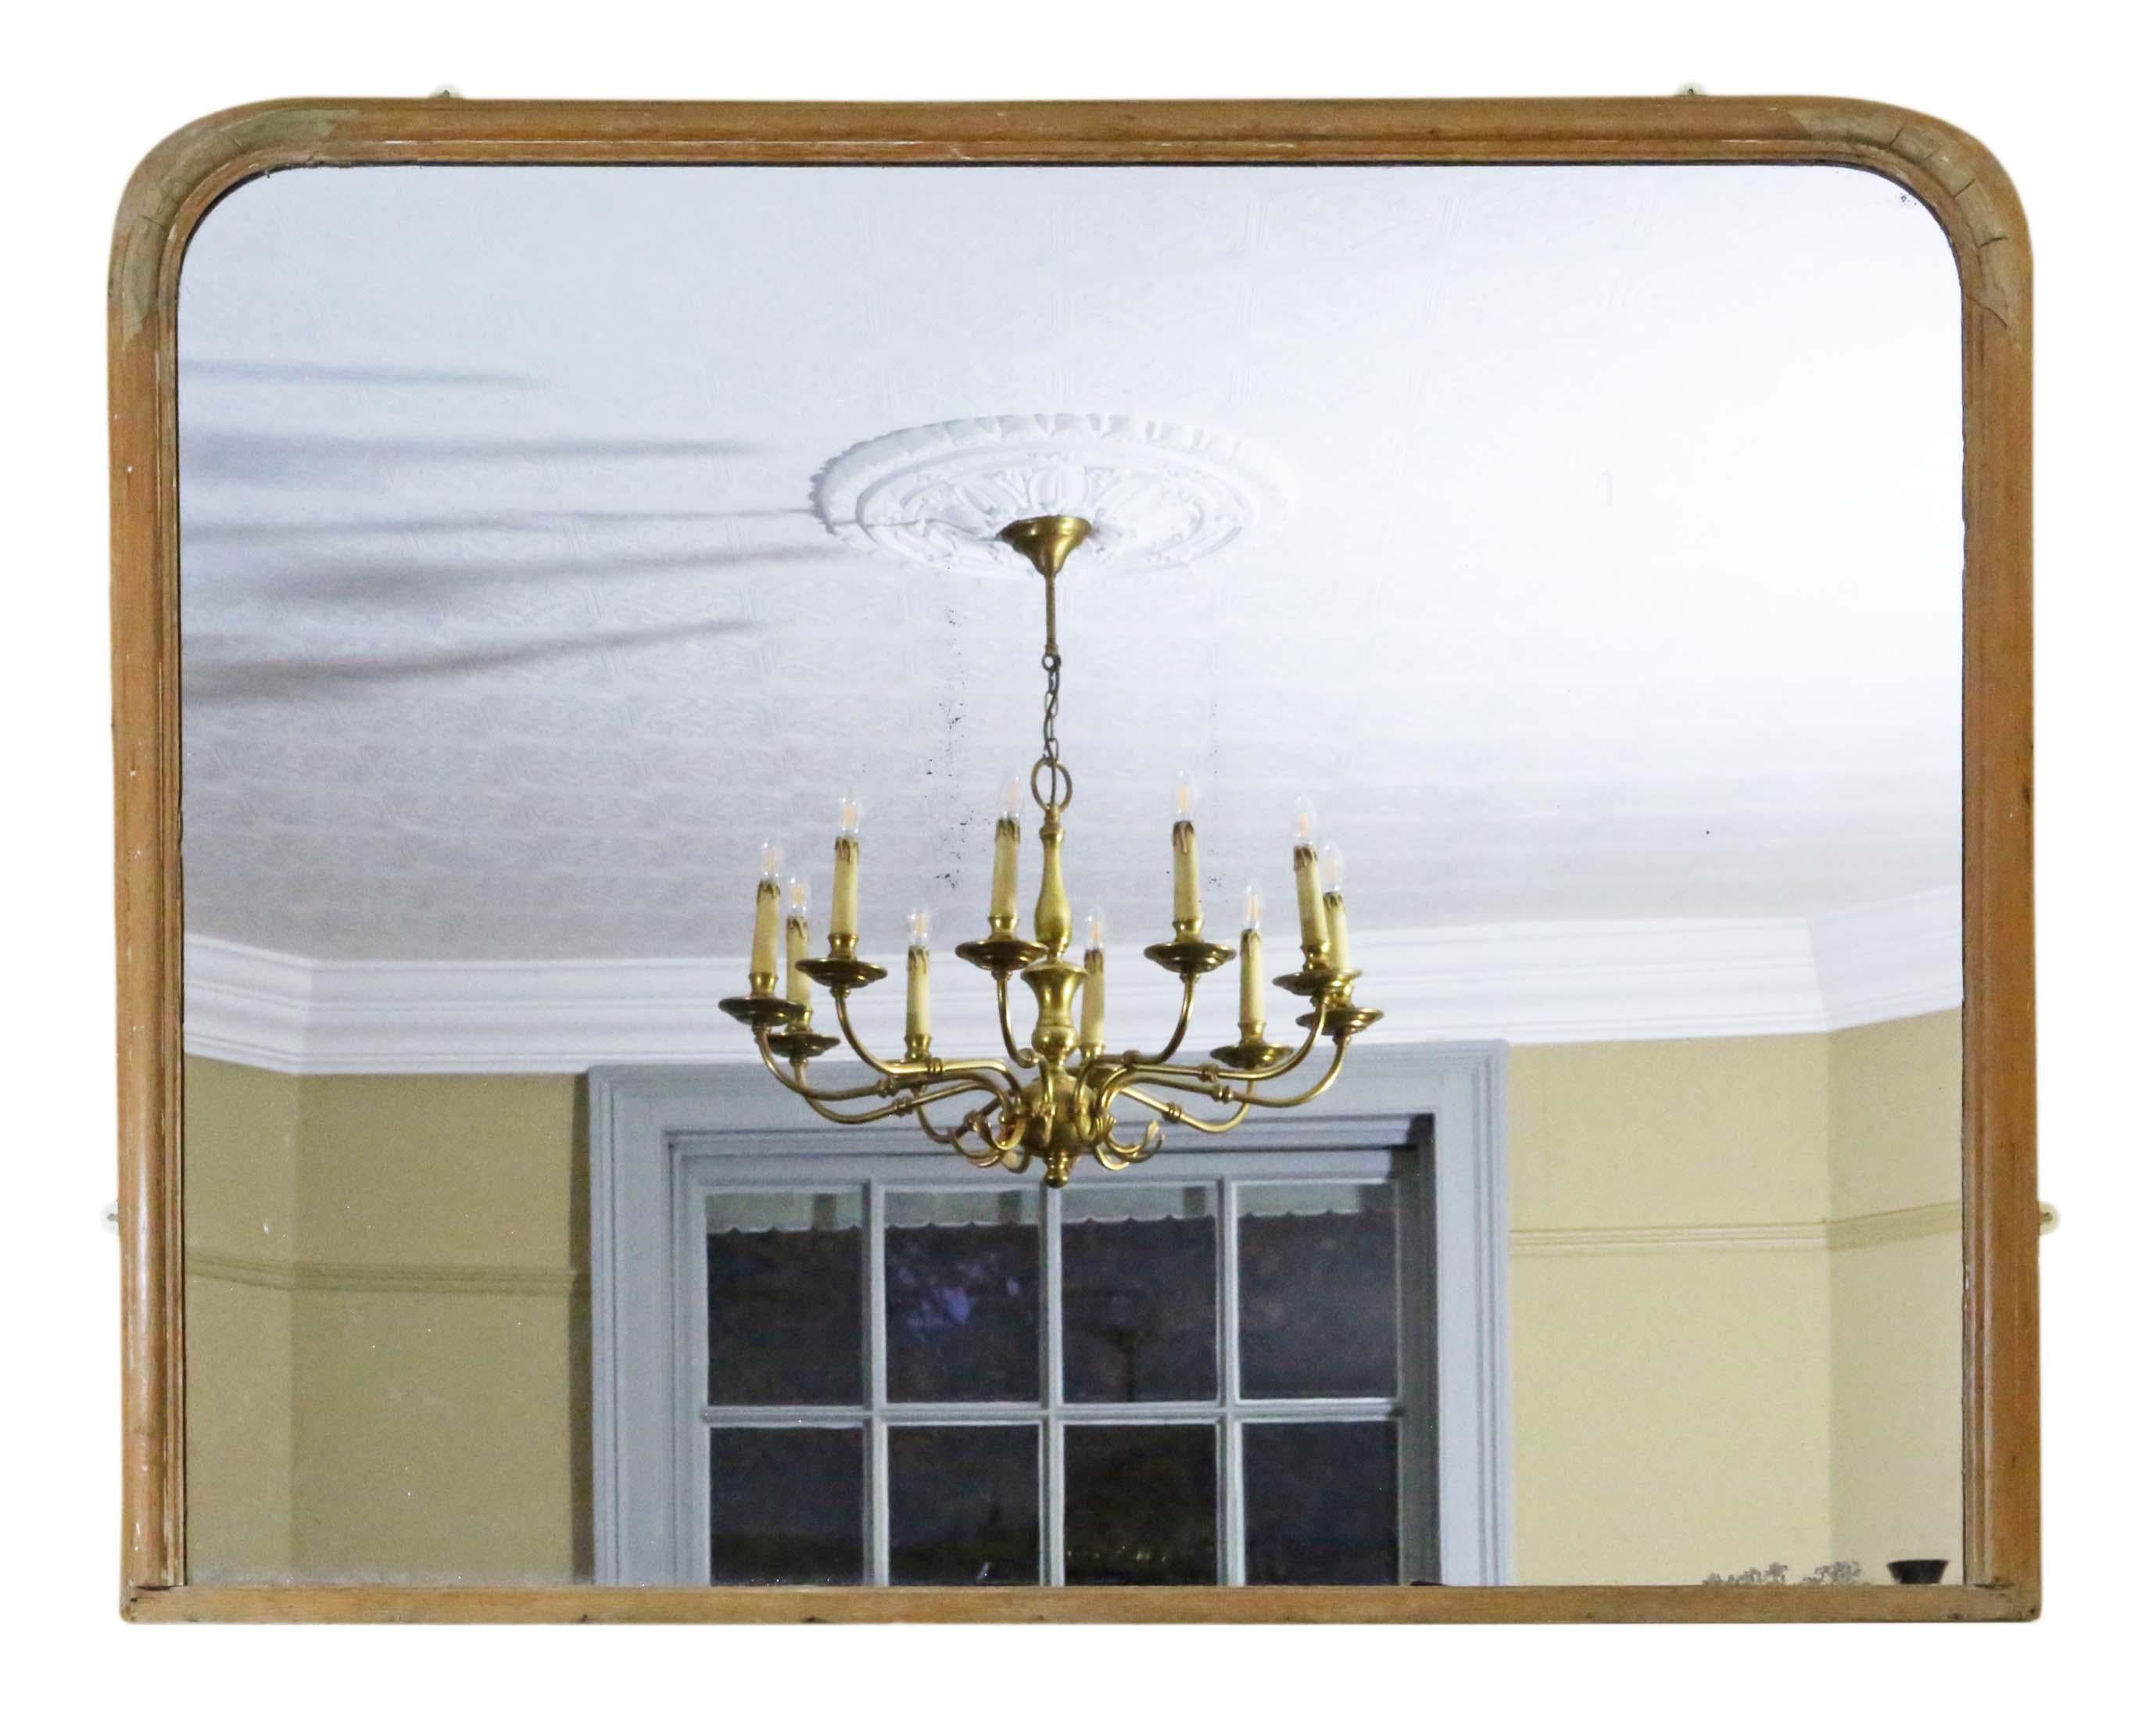 Antique quality 19th century very large pine wall mirror or overmantle. Much wider than most. 

An impressive rare find, that would look amazing in the right location. No loose joints.

The original glass has only light oxidation, age related